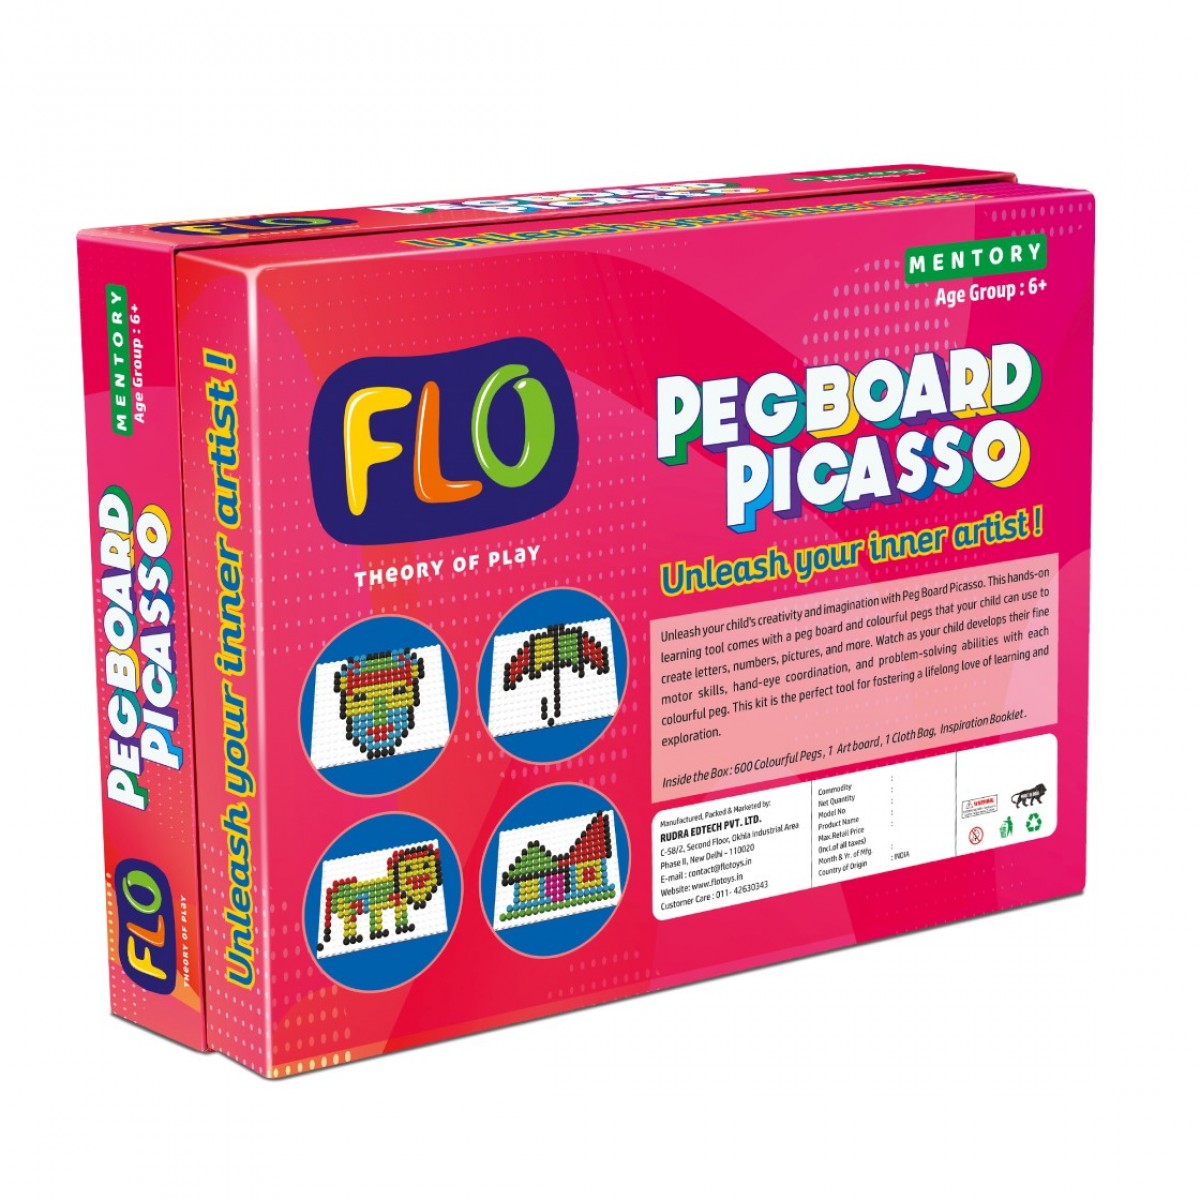 Flo Peg Board Picasso learning kit for kids Multicolour 6Y+